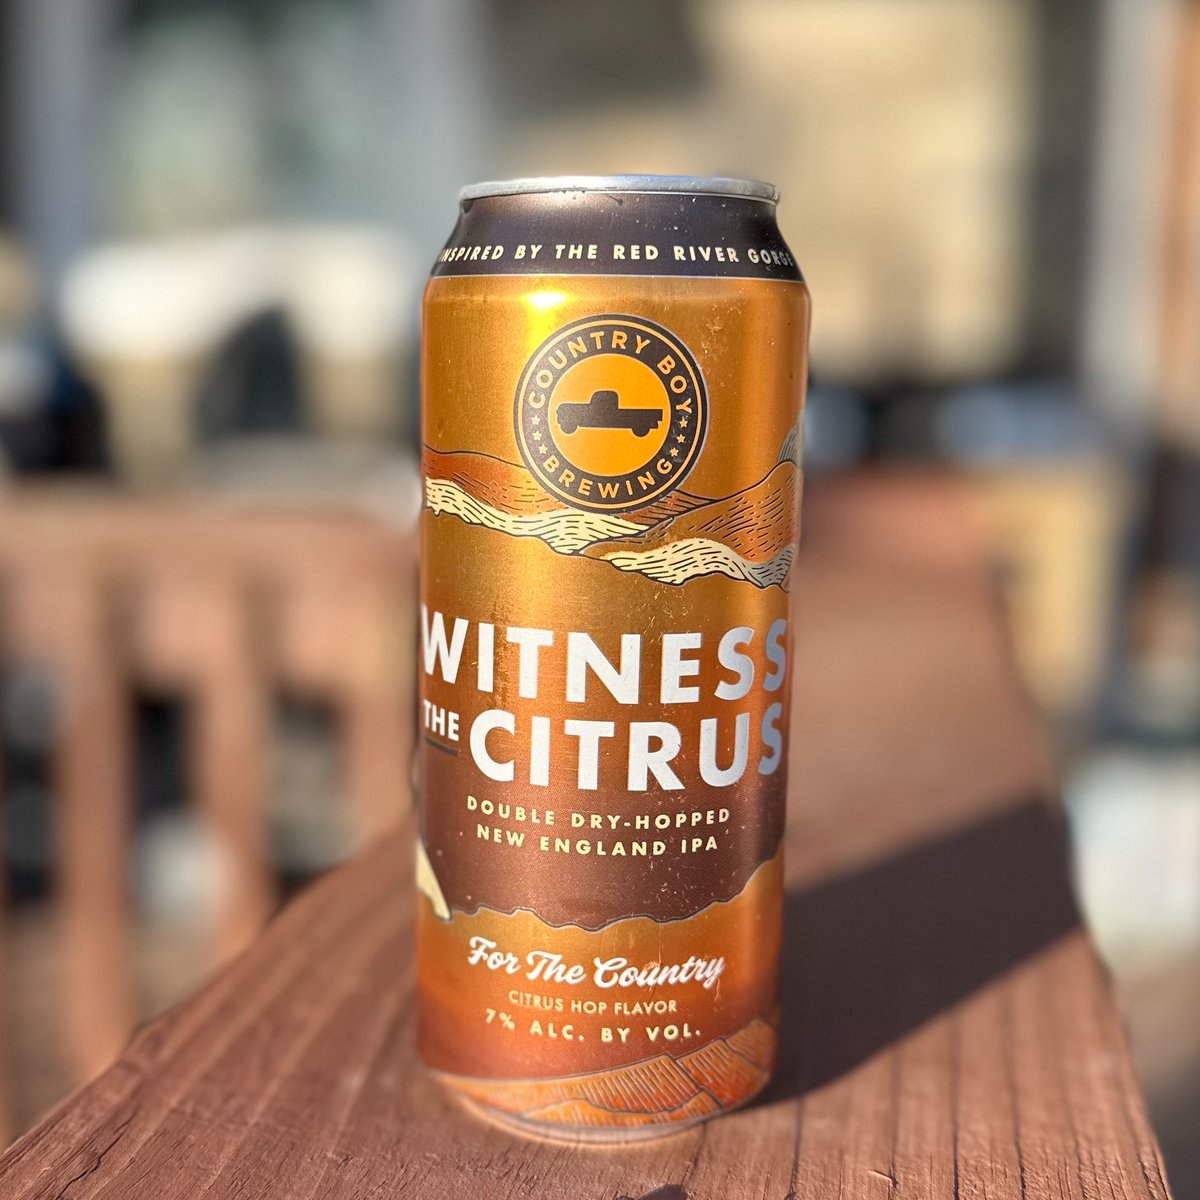 Inspired by the Red River Gorge, Witness the Citrus is double dry hopped with Citra, Mosaic, and Centennial for citrus forward profile that keeps you coming back for that next sip. Grab your four pack today!